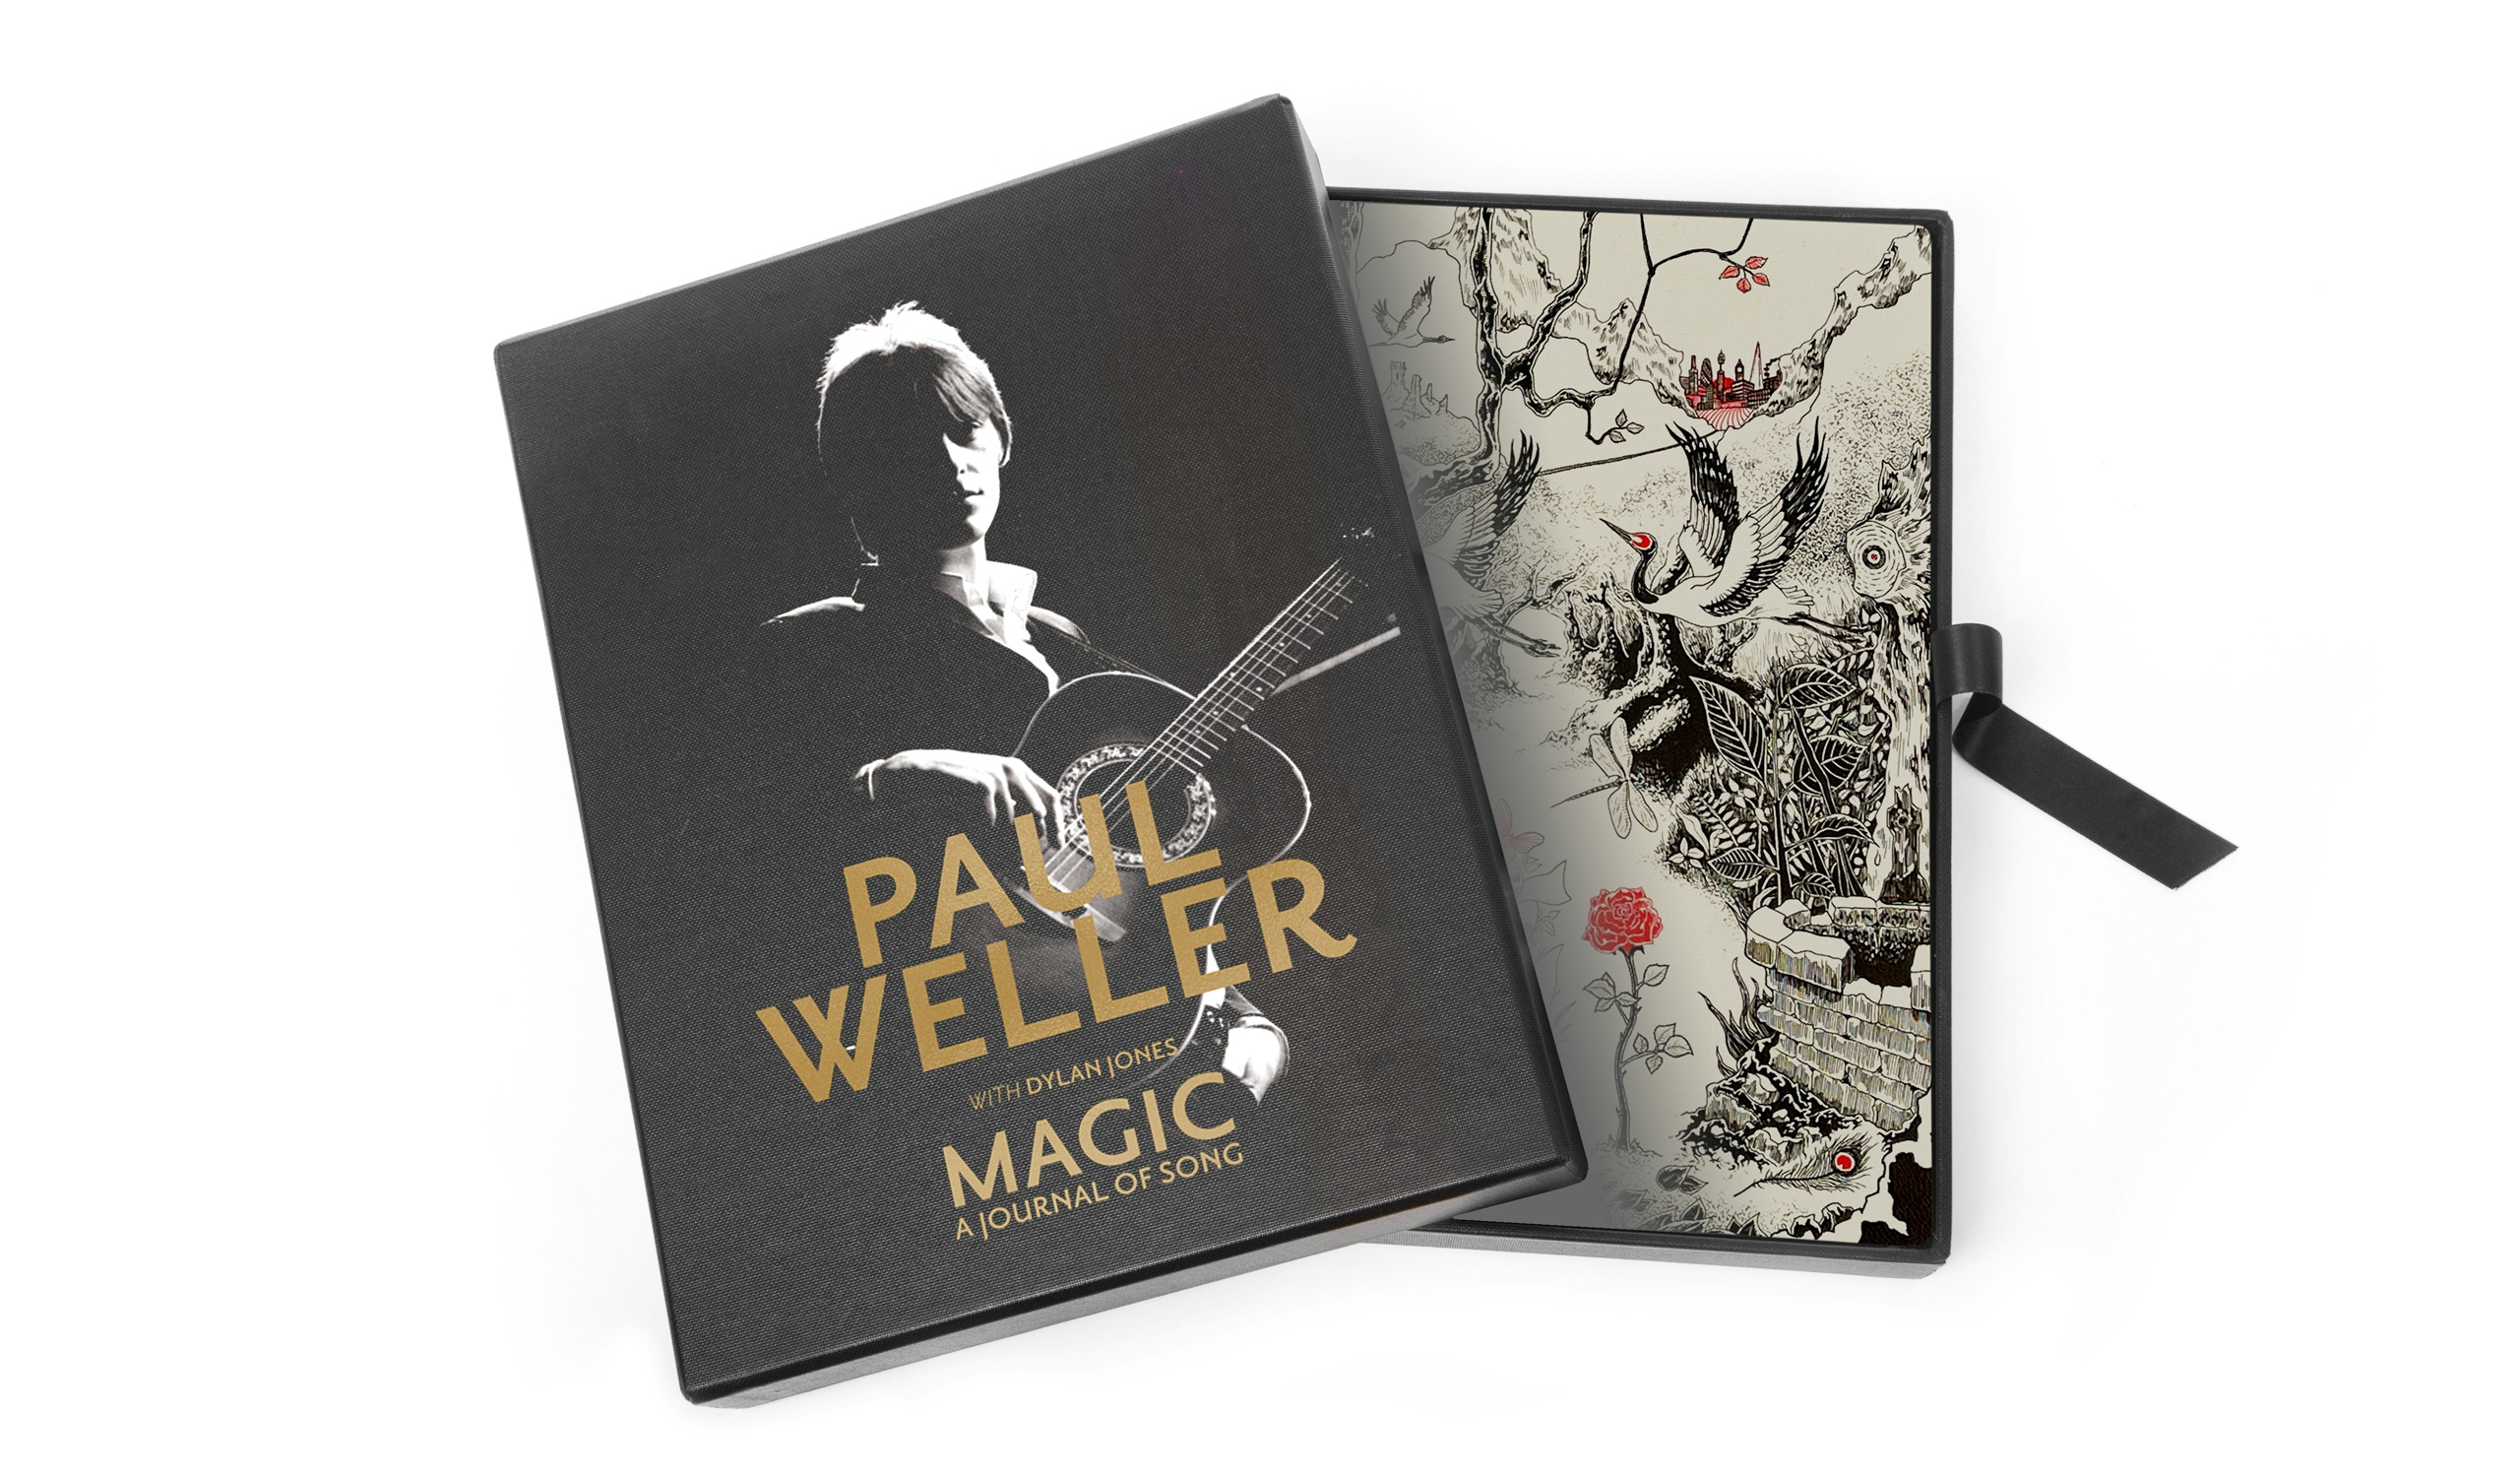 Album artwork for Album artwork for Magic: A Journal of Song ( Collector Edition) by Paul Weller with Dylan Jones by Magic: A Journal of Song ( Collector Edition) - Paul Weller with Dylan Jones